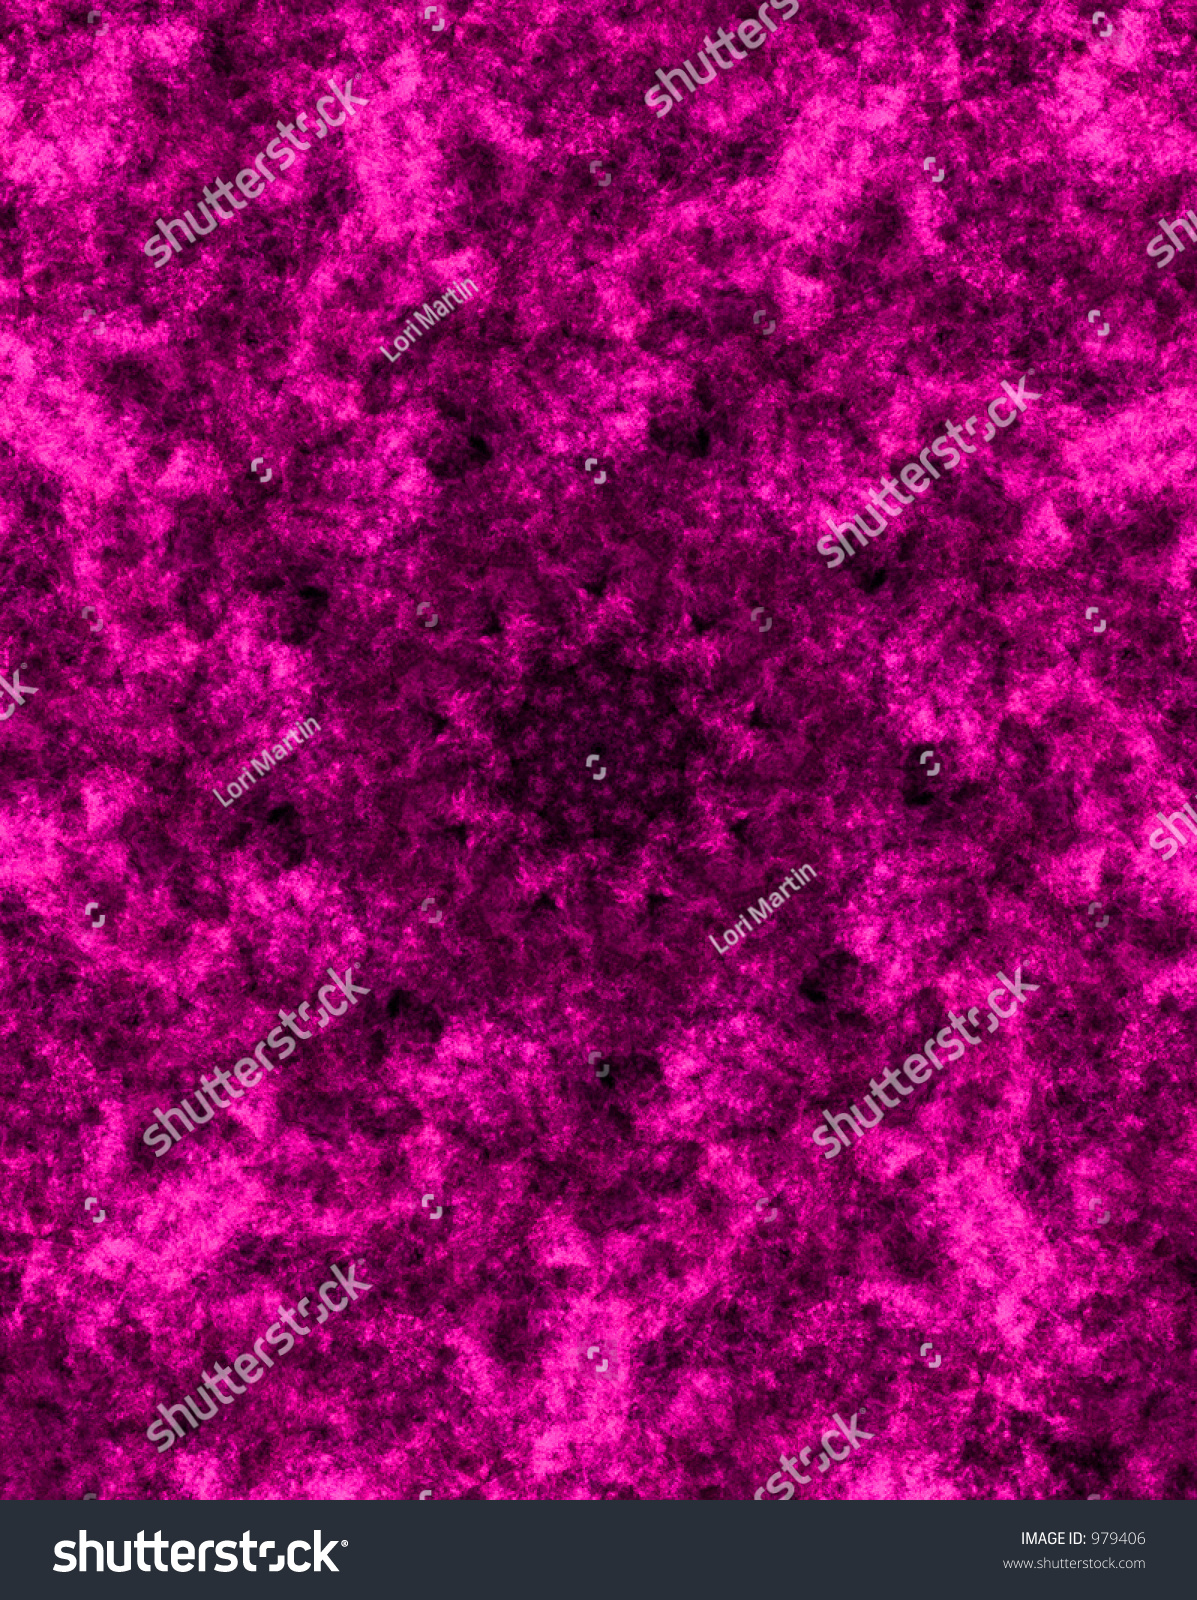 Pink And Black Abstract Background Stock Photo 979406 : Shutterstock